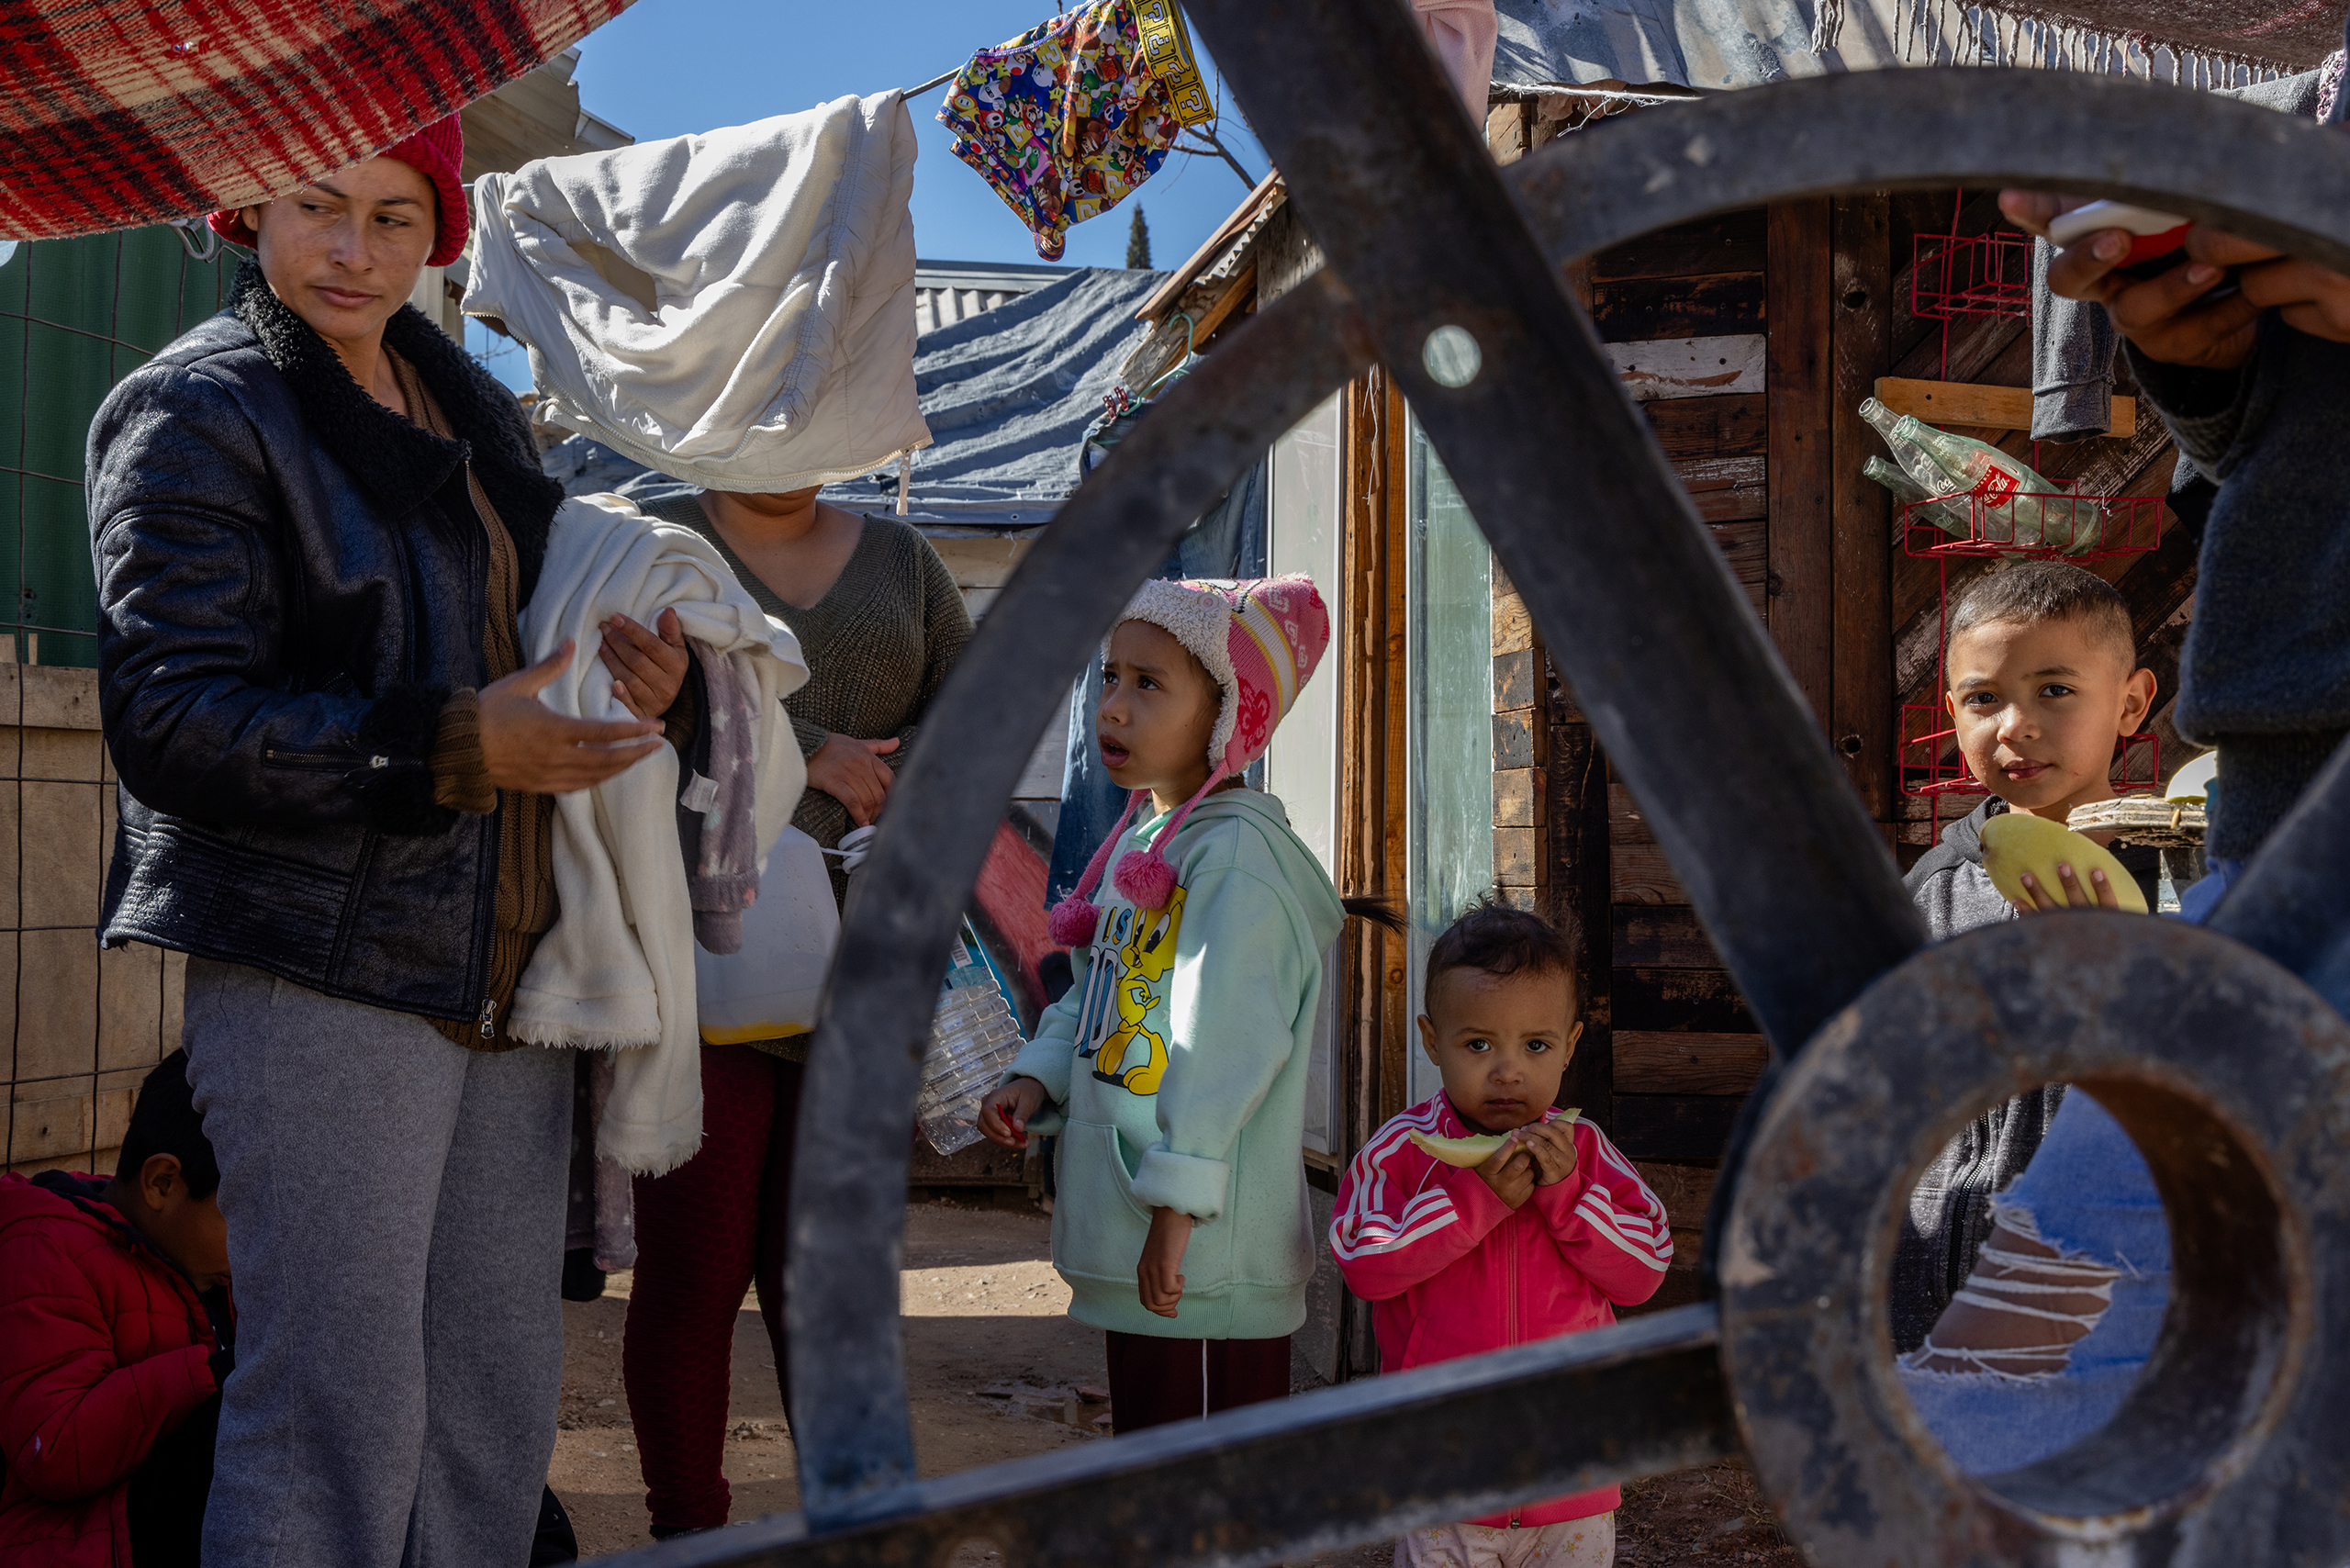 A family of migrants, including, from left, Ruth Barrera, 32; Arlene Carmona, 7; Luis David Araujo, 7; and Marta Araujo, 2, eats fruit and does laundry on Feb.12, 2024, outside their temporary home in Nogales, Sonora, Mexico, as they await their asylum court date in the U.S. (Photo by Kayla Jackson/Cronkite News)
